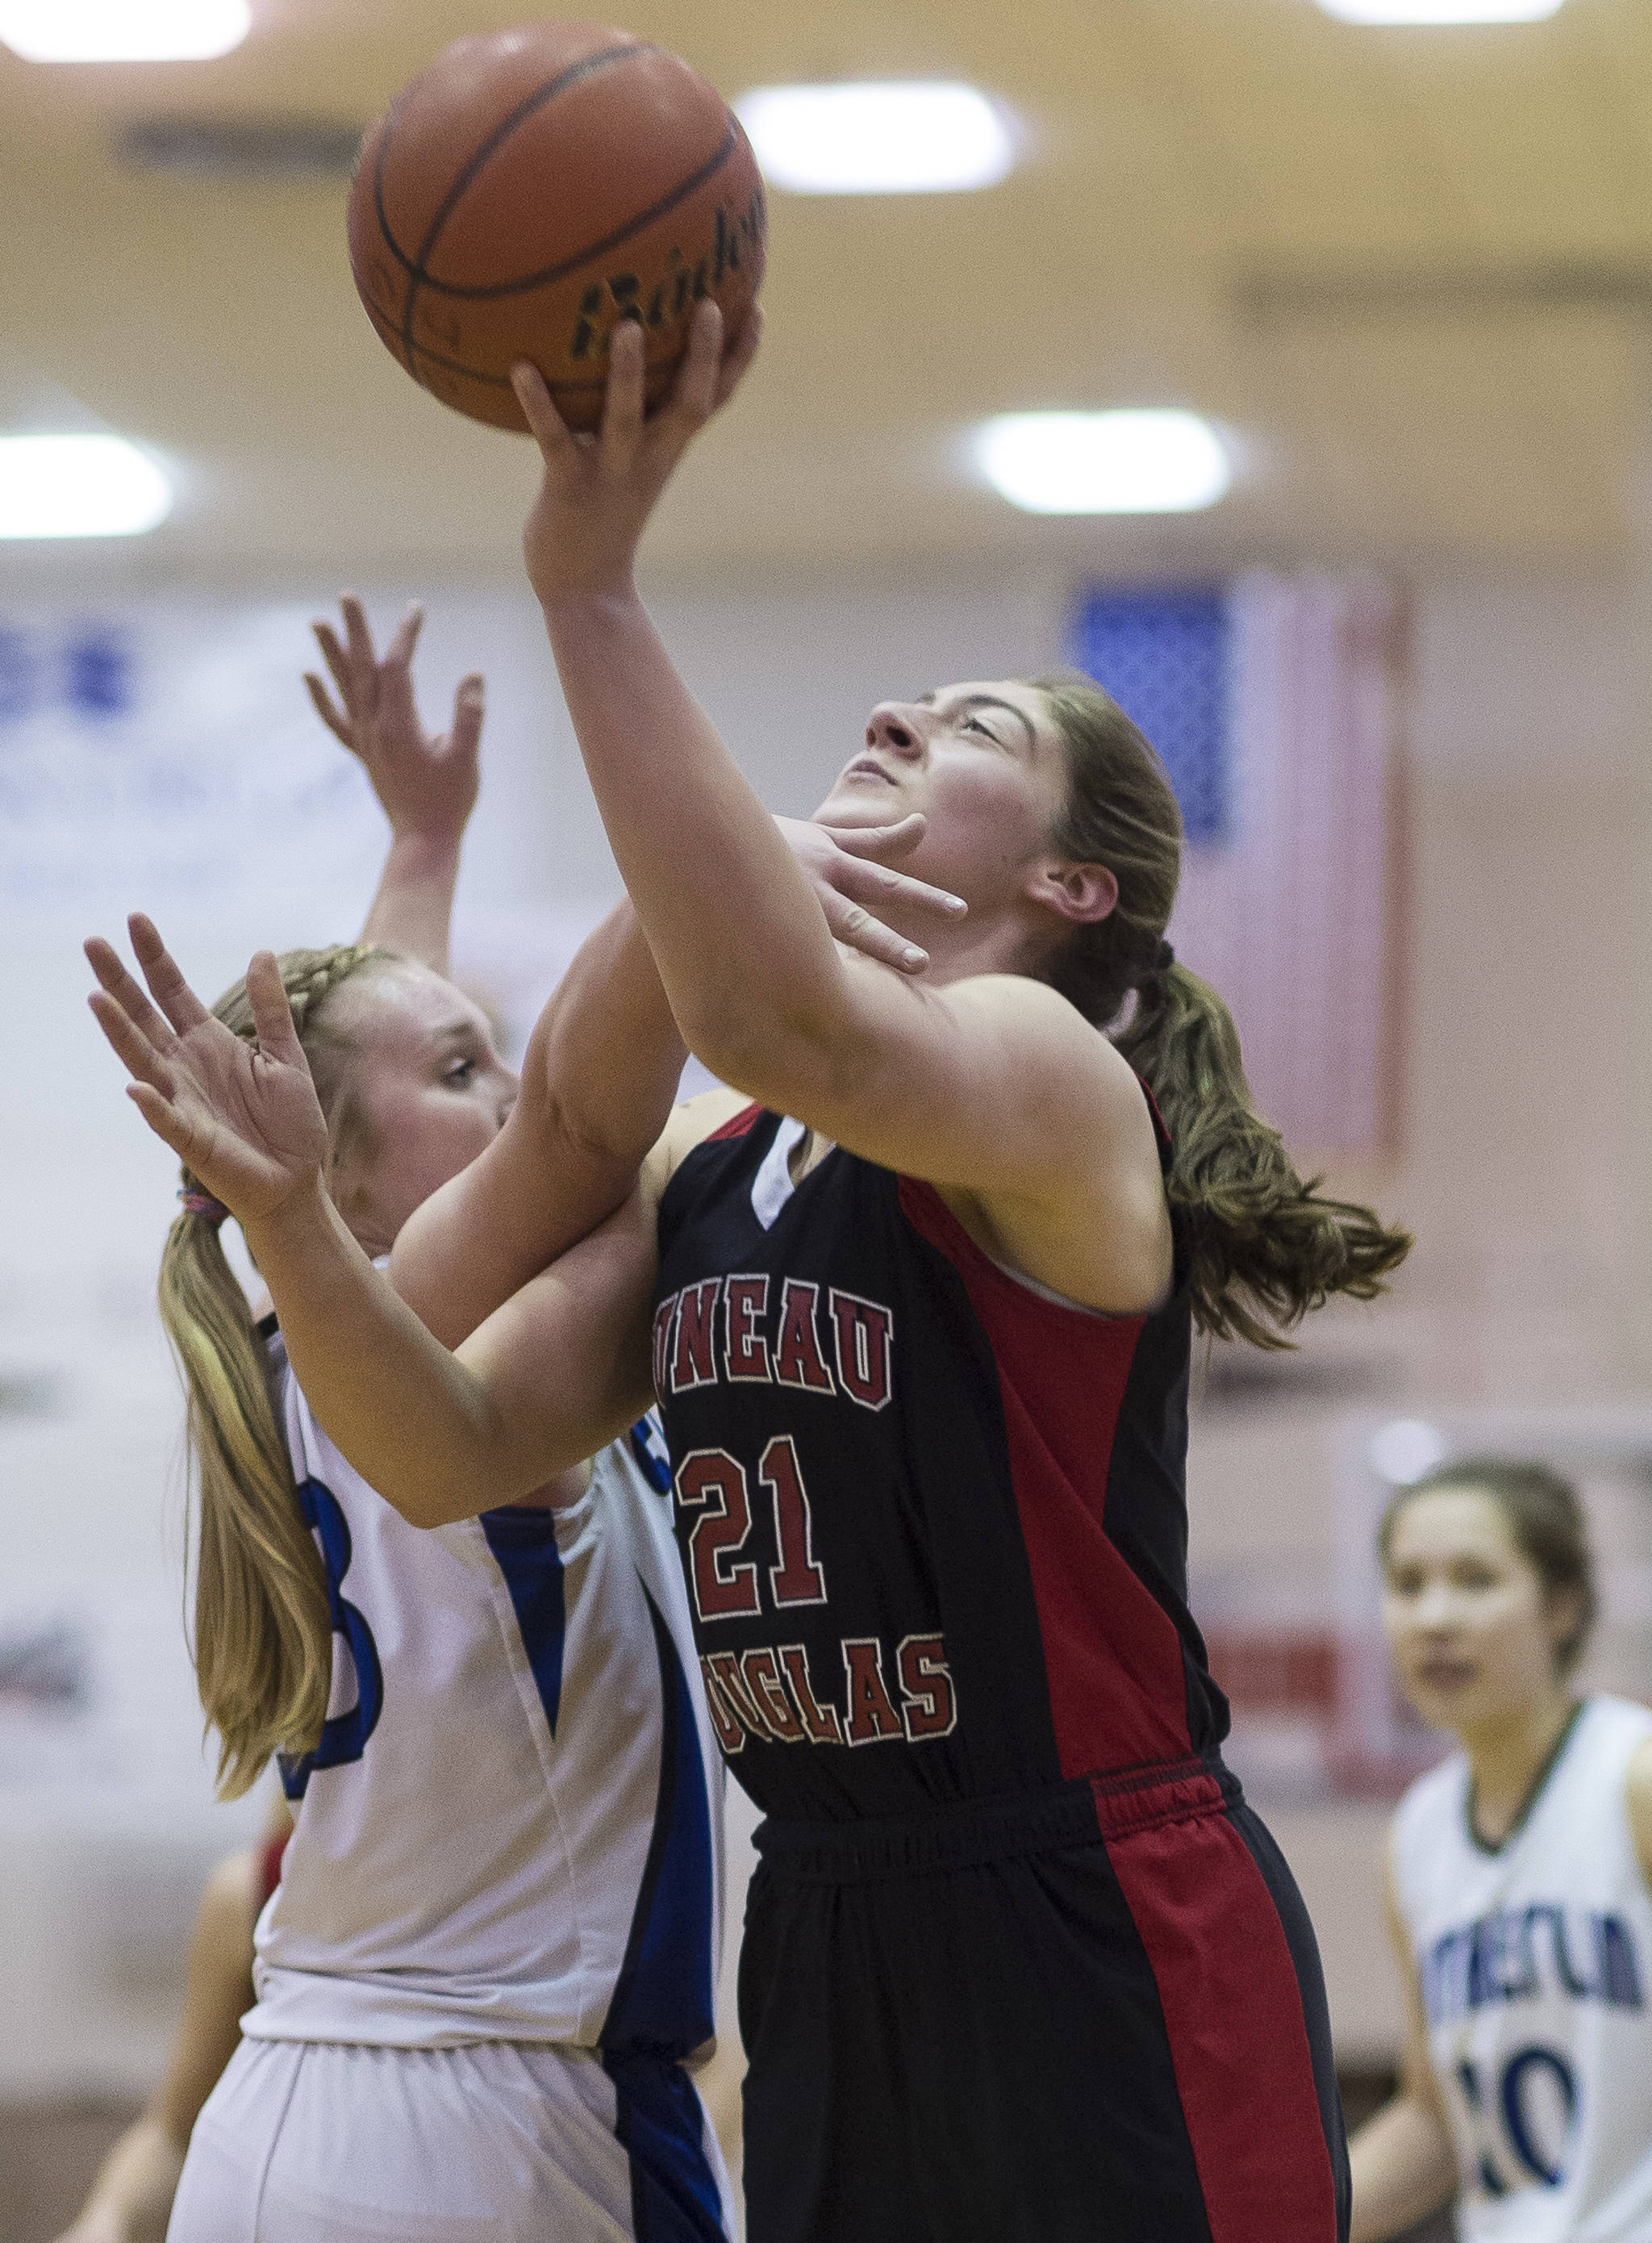 Juneau-Douglas’ Cassie Dzinich, right, is fouled by Sutherlin’s Taylor Moser during their Capital City Classic Basketball Tournament game at JDHS on Thursday, Dec. 28, 2017. (Michael Penn | Juneau Empire)